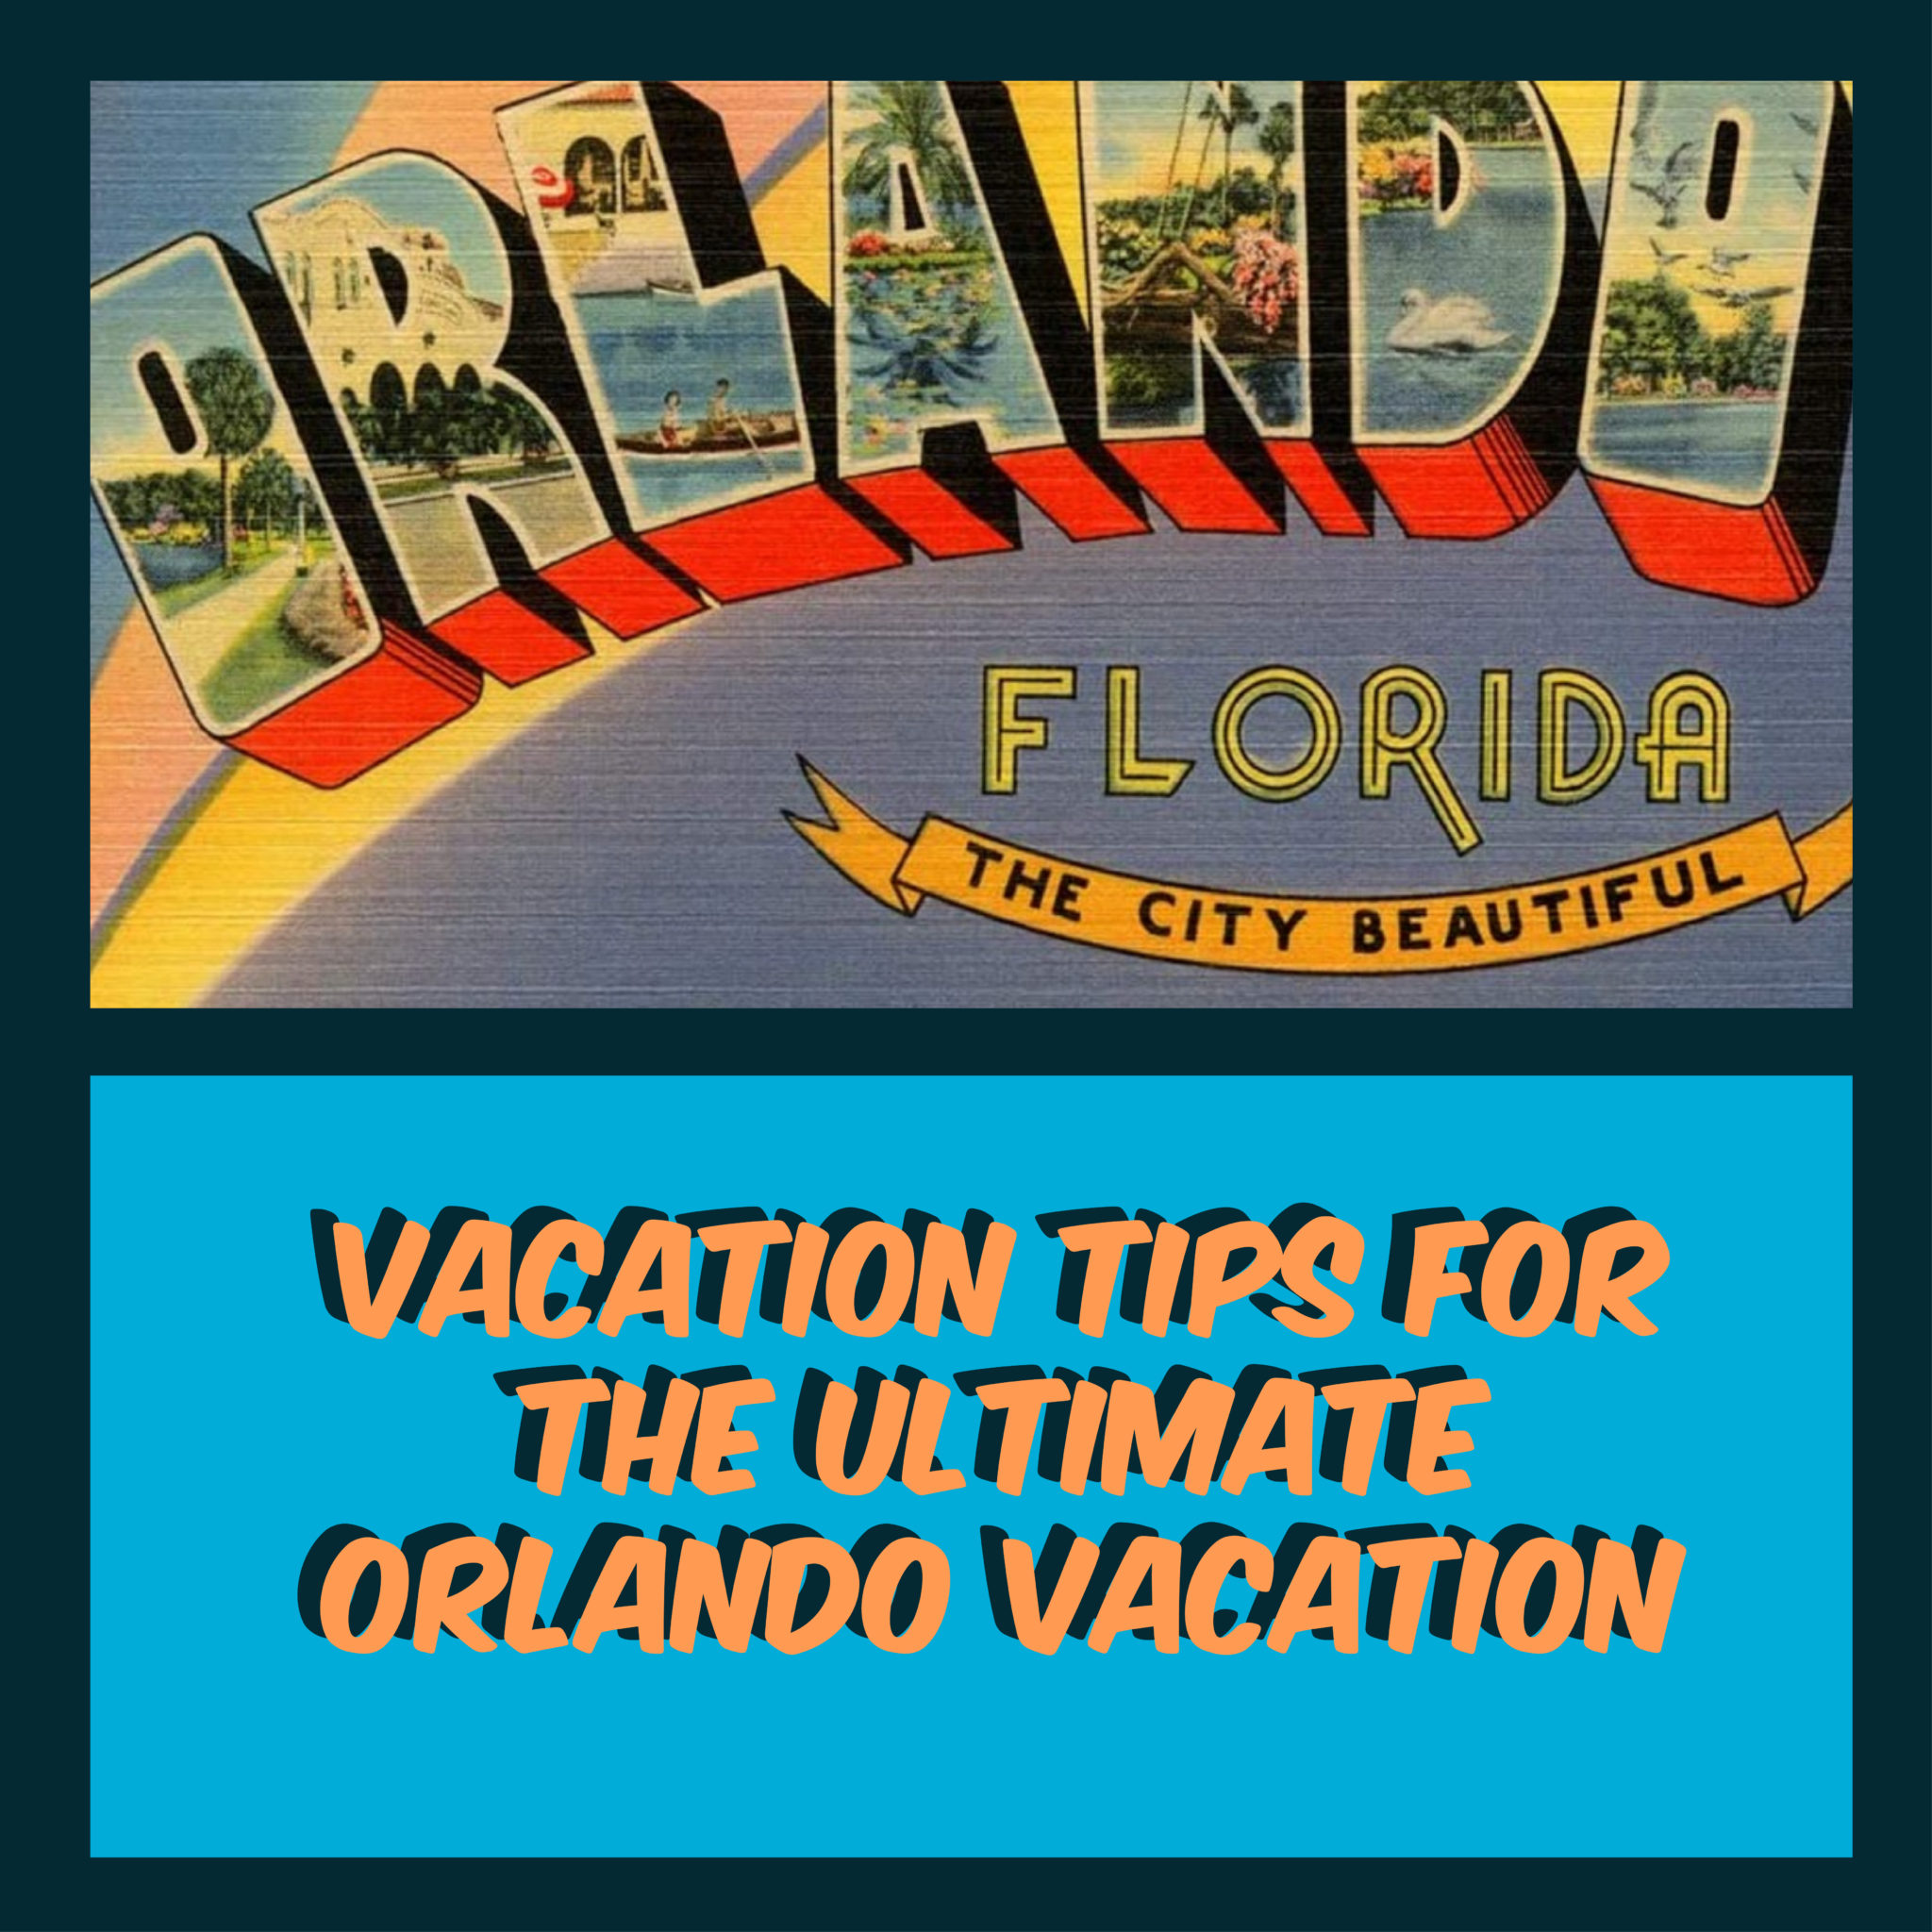 Vacation tips for the ultimate Orlando Vacation